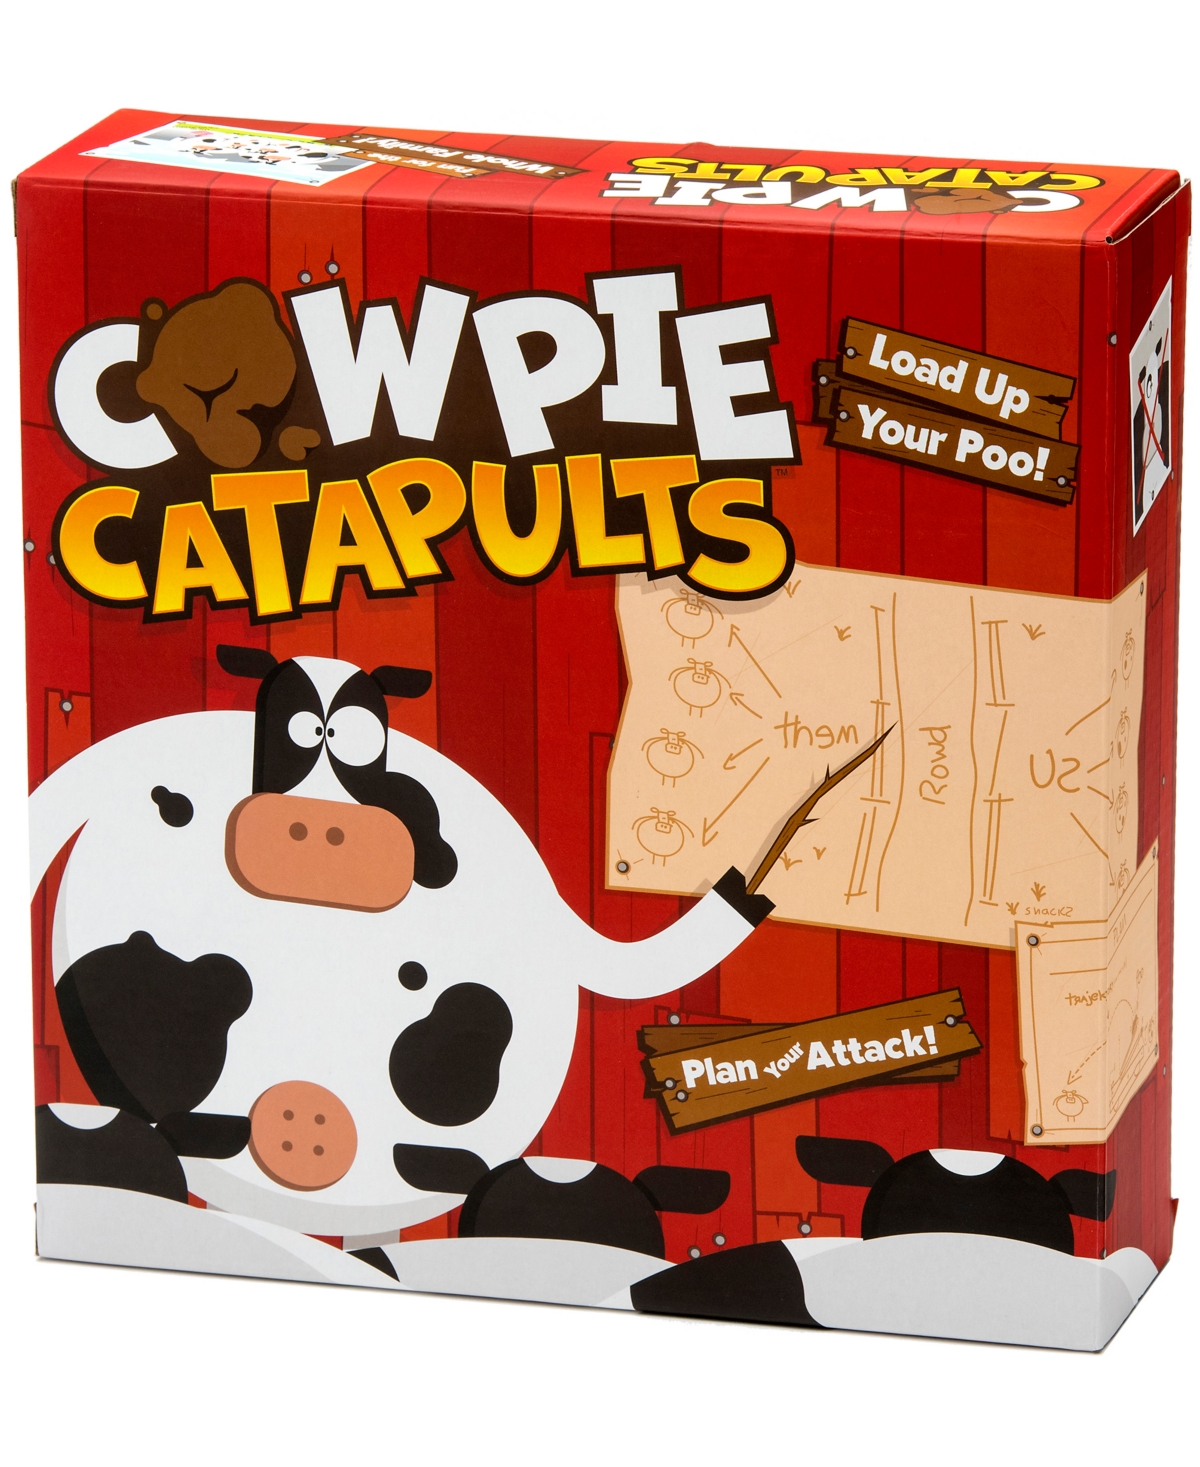 Forbidden Games The Good Game Company Cow Pie Catapults Game In No Color